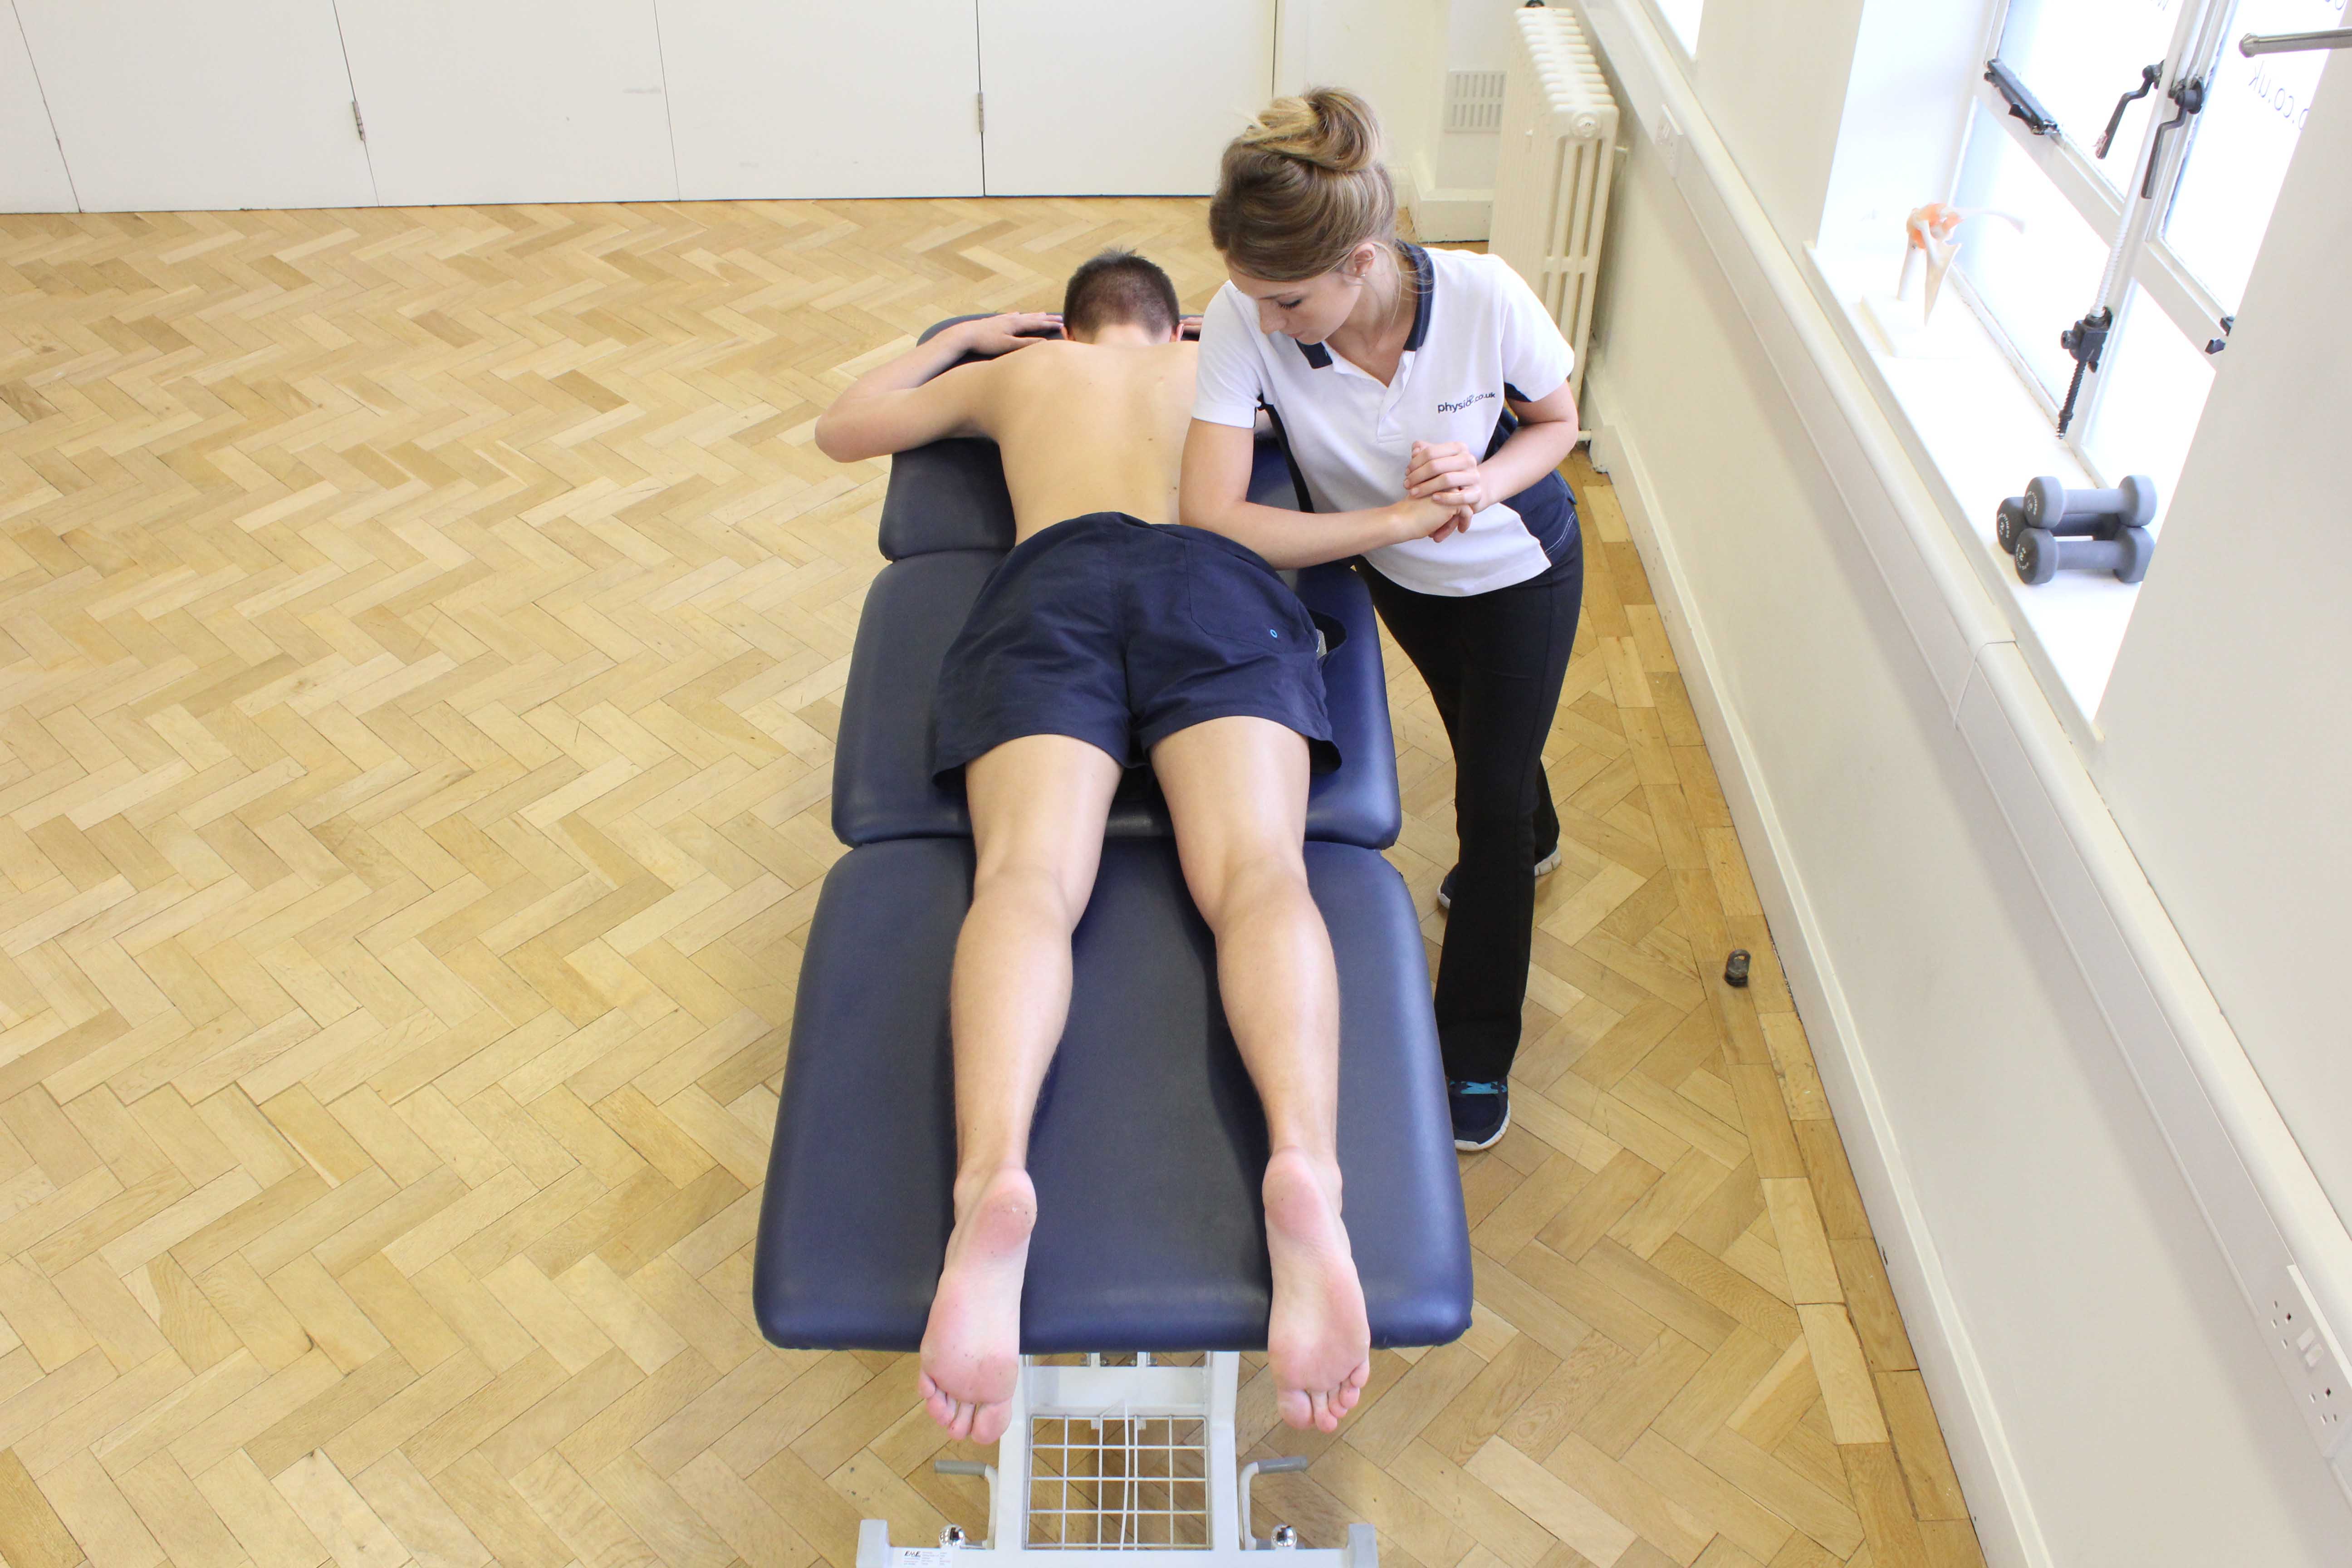 Deep tissue massage by a specialist therapist can help release benefical hormones that decrease stress